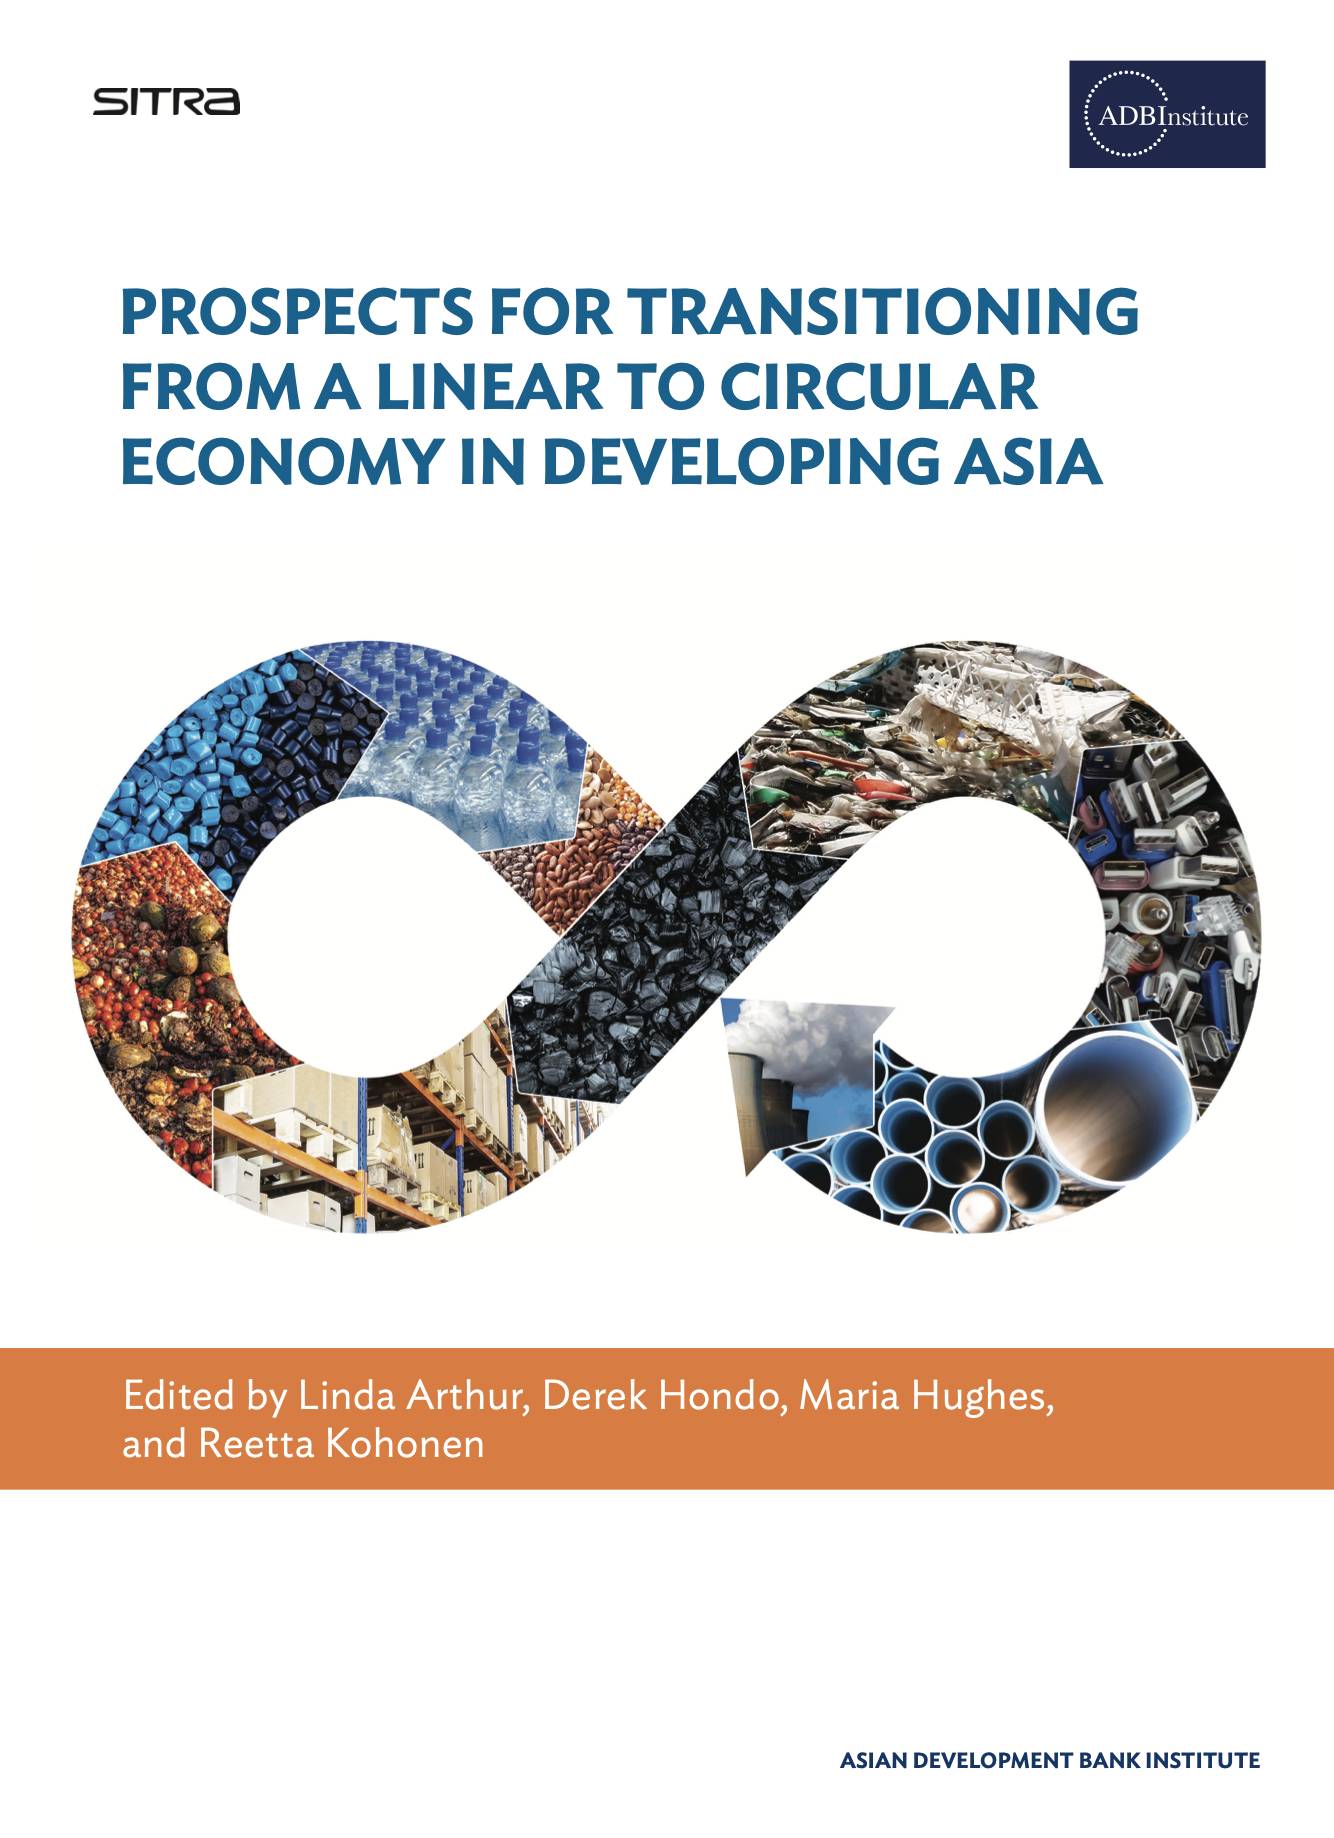 Prospects for transitioning from a linear to circular economy in developing Asia